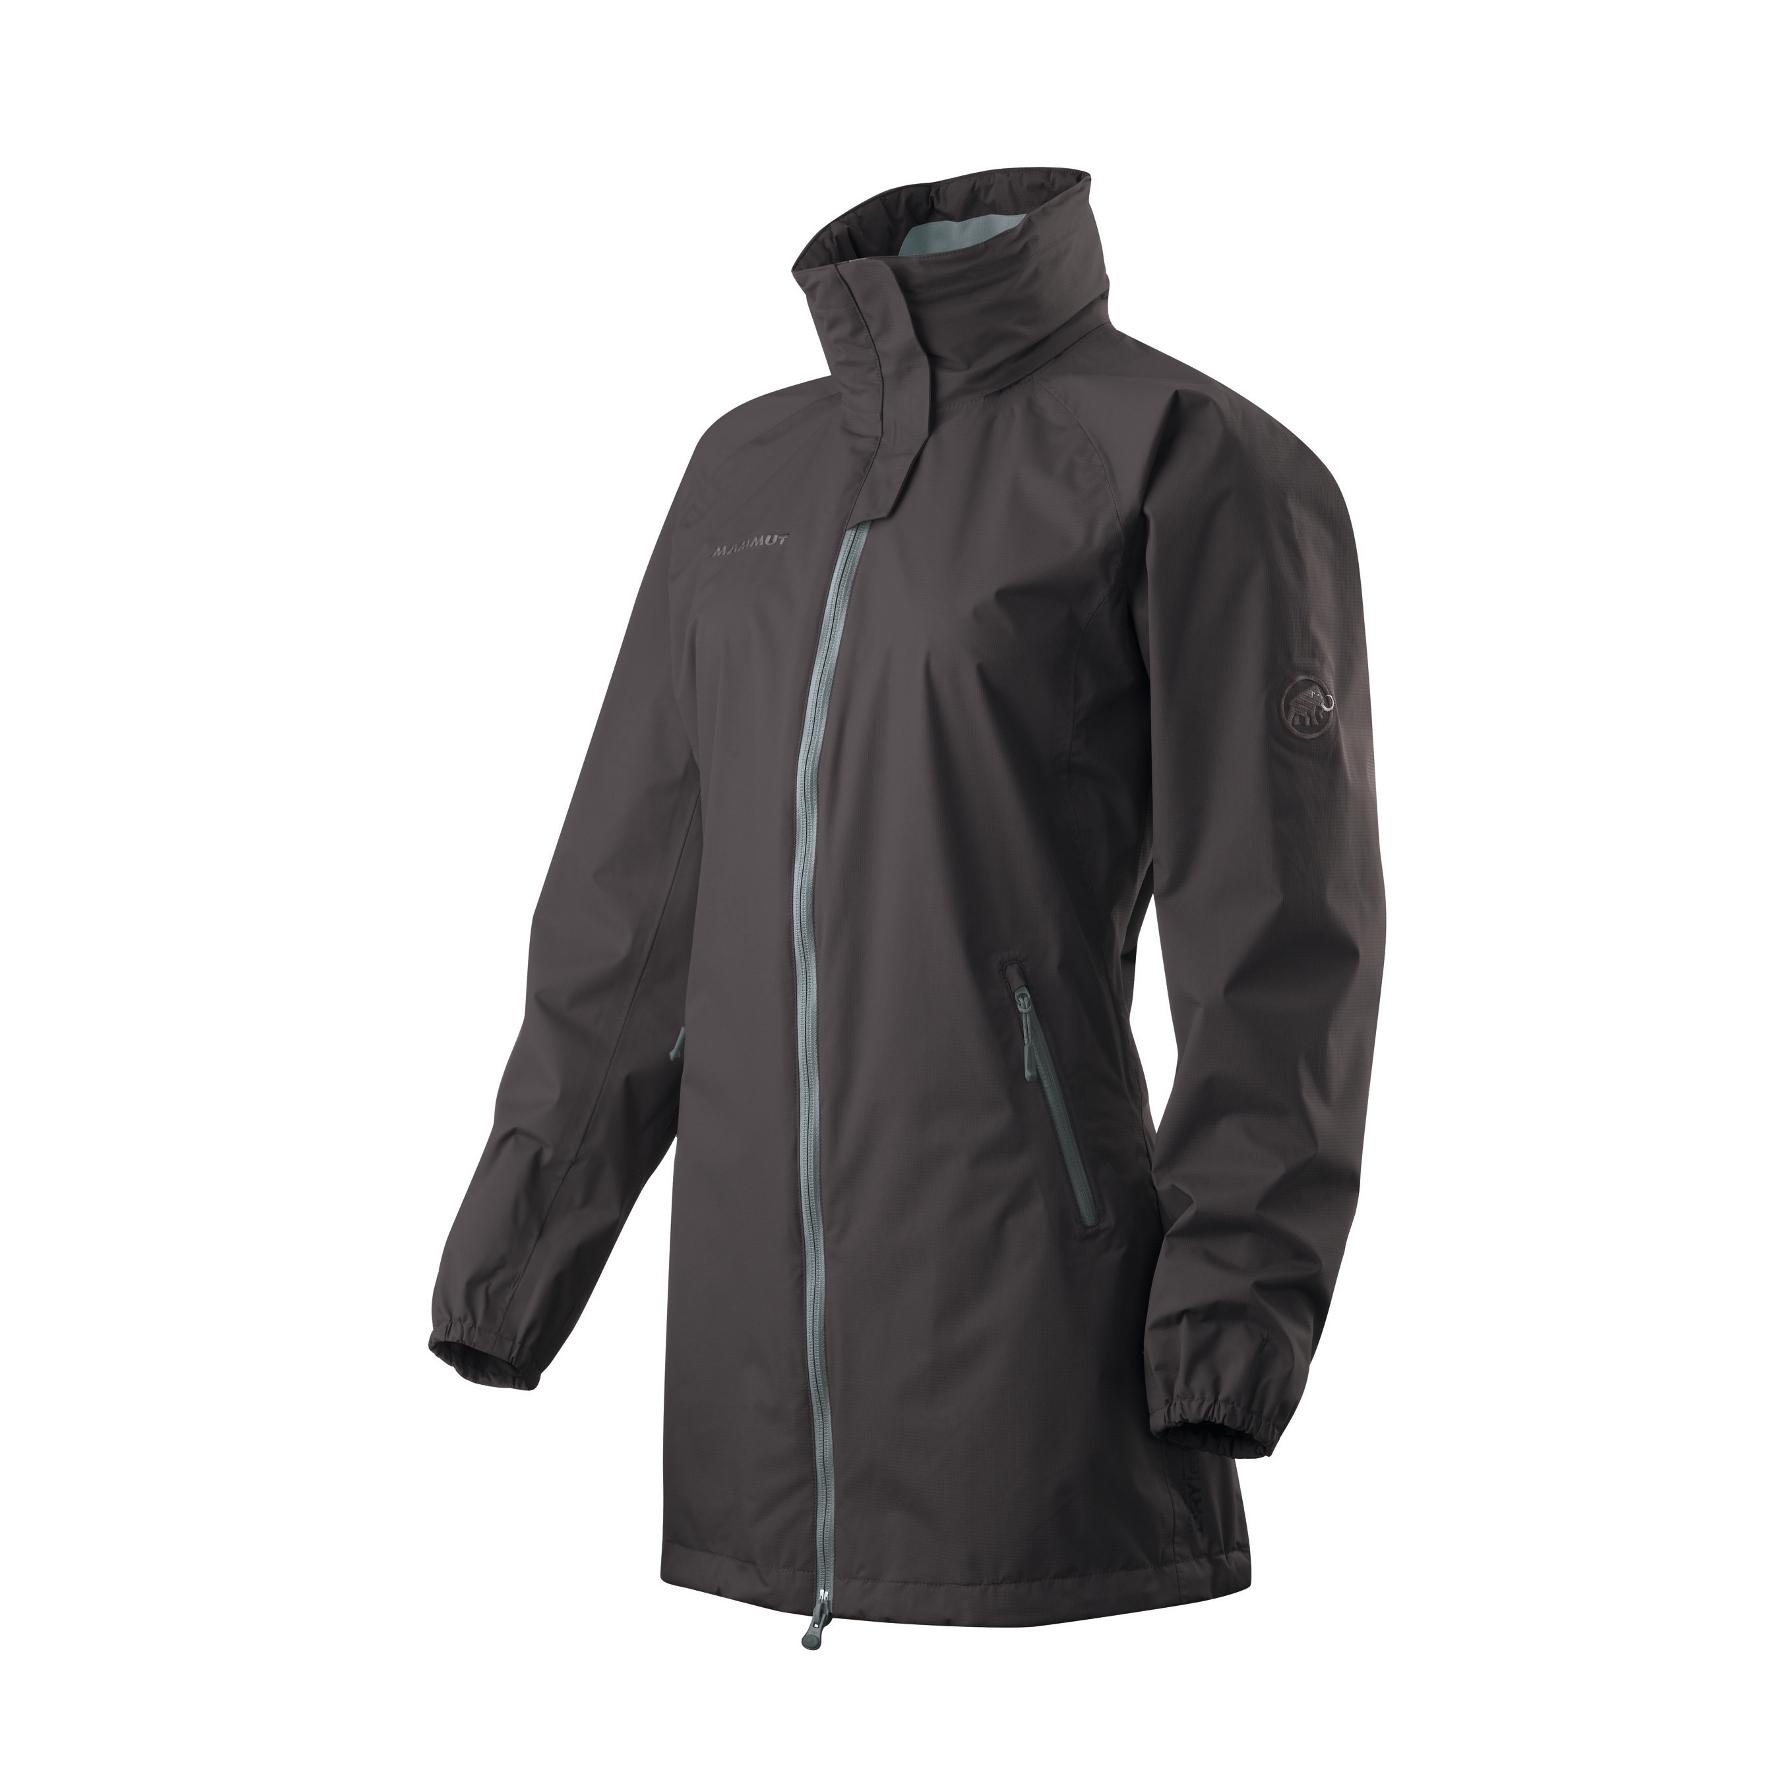 Foto Chaqueta impermeable Mammut Youko gris para mujer , l foto 597899